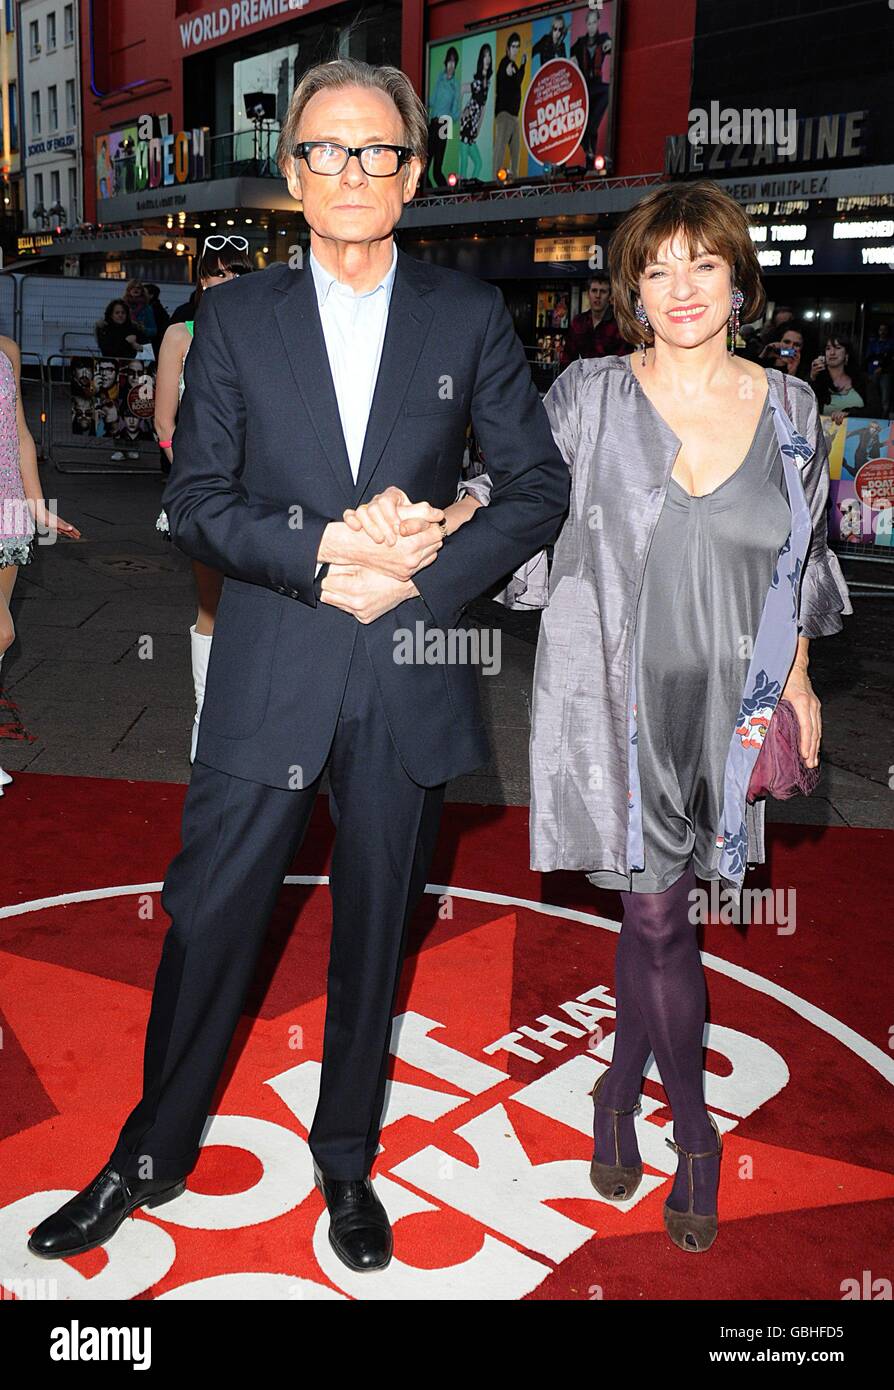 Bill Nighy (left) and Diana Quick arriving for the premiere of The Boat That Rocked at the Odeon Leicester Square, London. Stock Photo